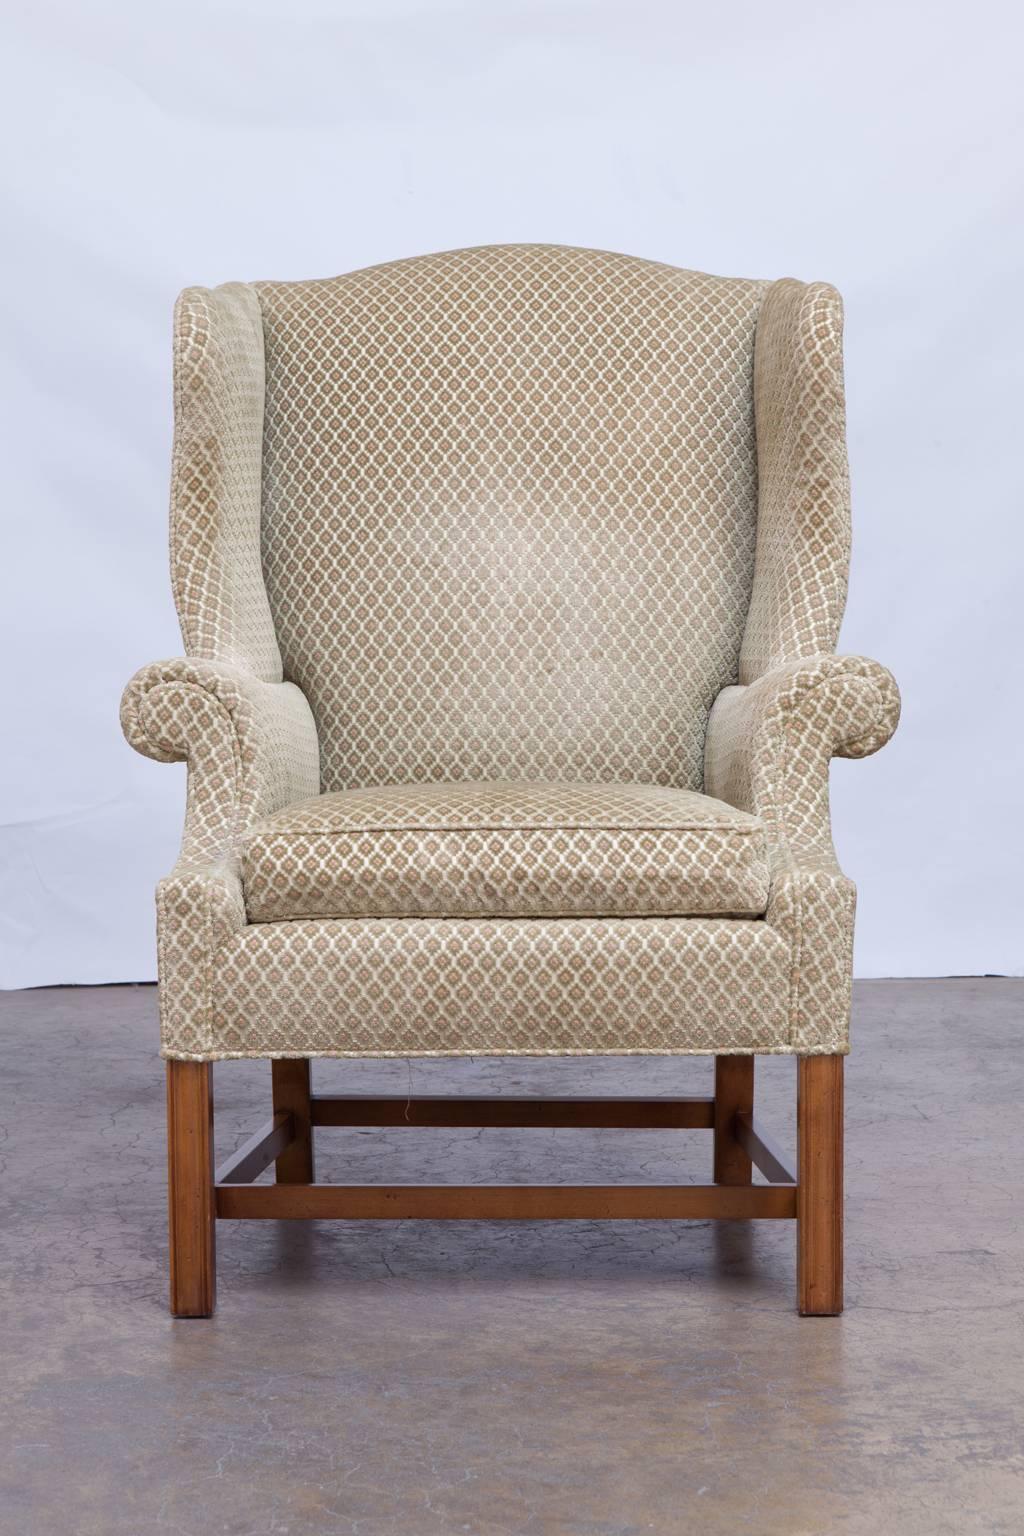 Generous traditional wingback chair by Baker featuring well developed serpentine arms and wings with a geometric pattern soft upholstery over a cream silk background. Supported by fluted front legs with an H-stretcher in excellent condition with no